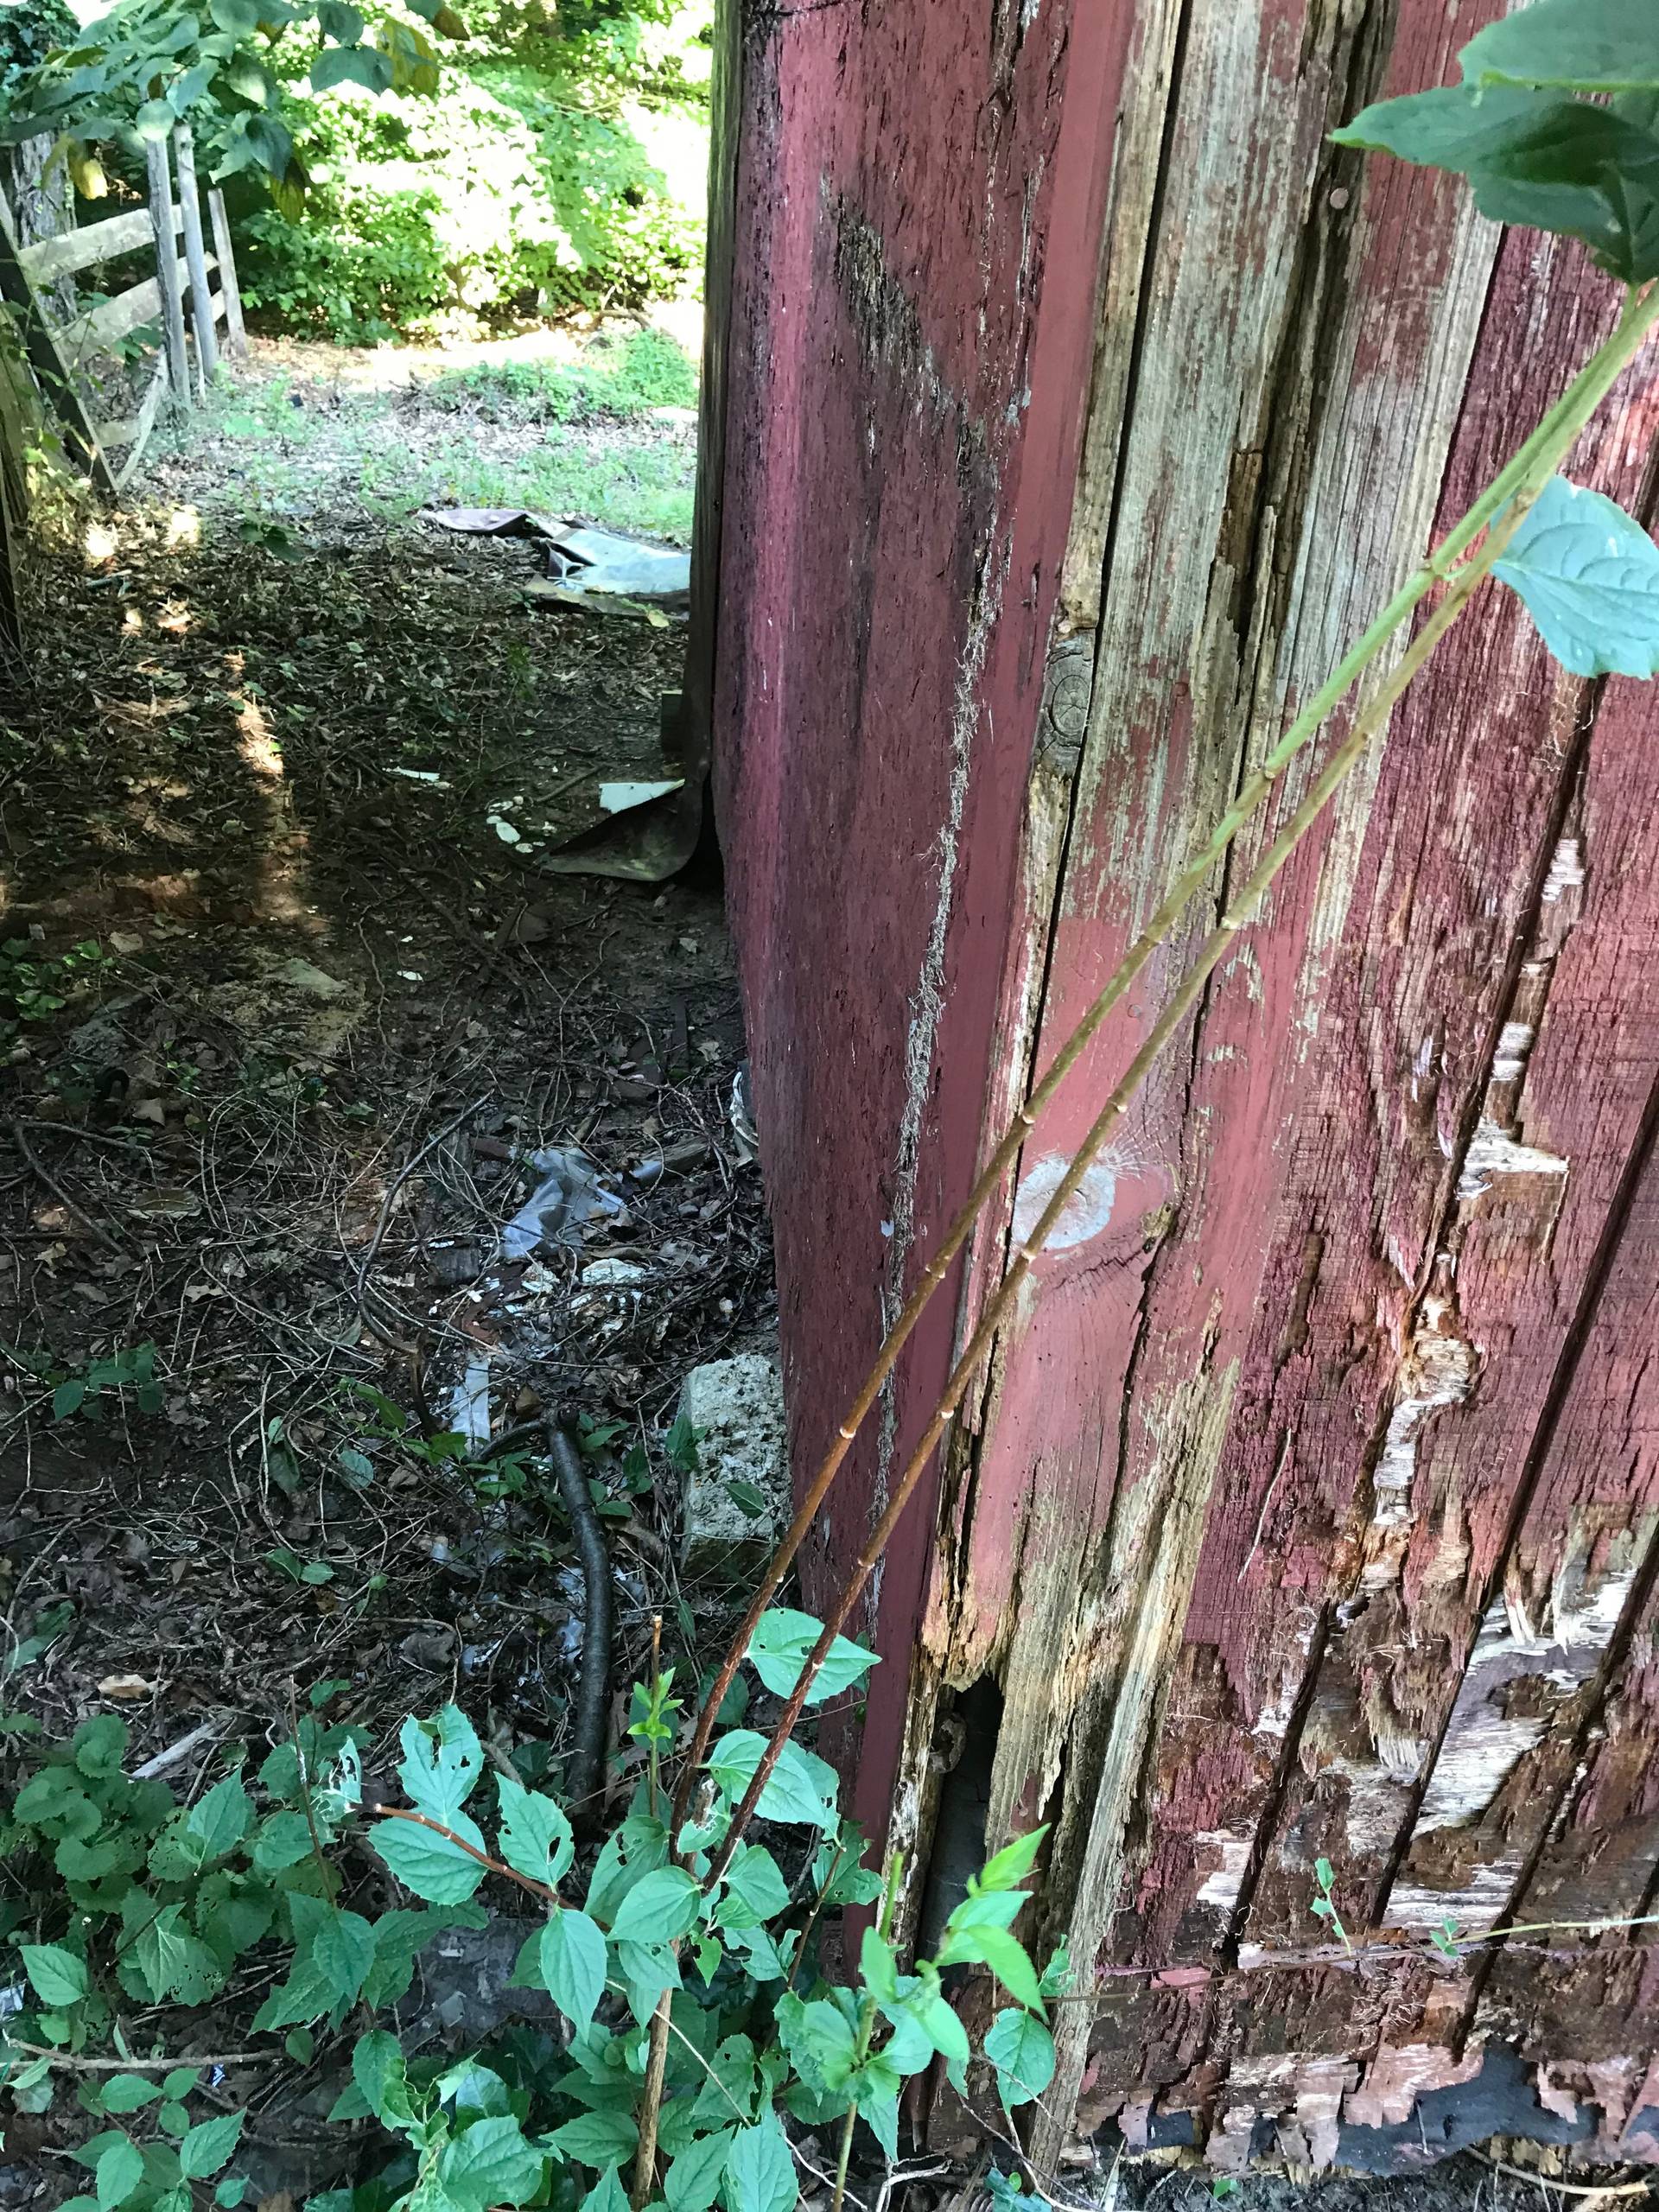 Shed Renovation Project